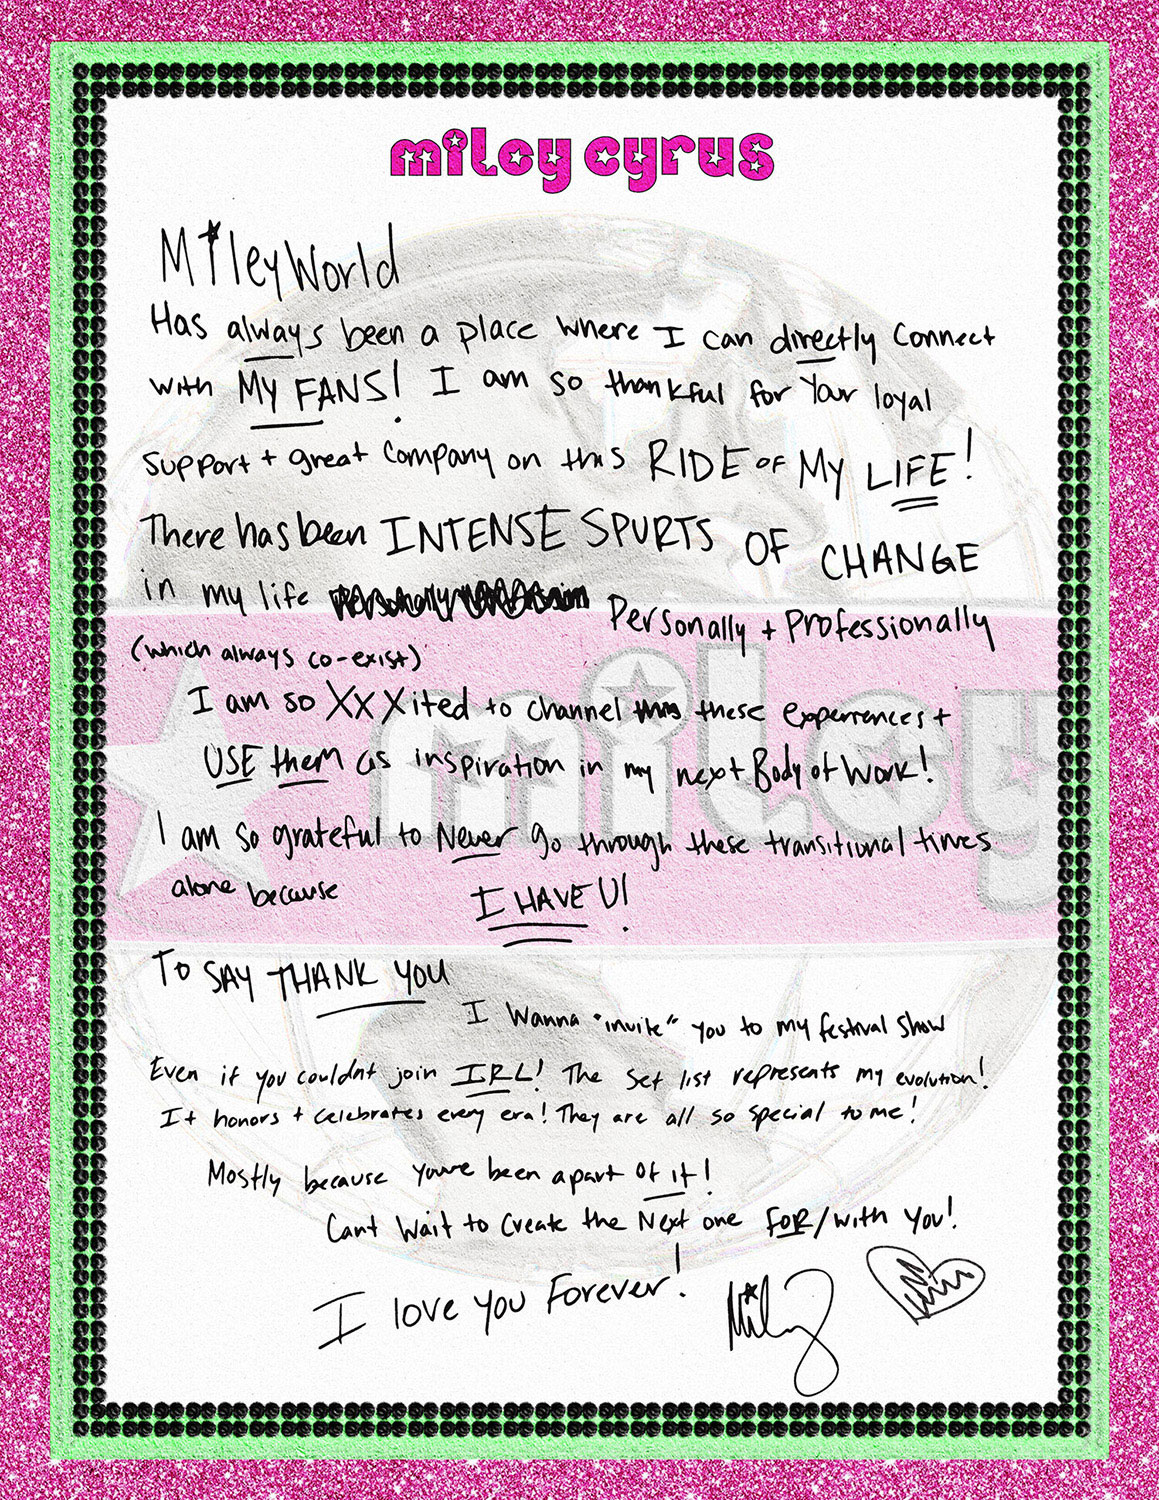 Miley Cyrus shares a note addressing her ‘intense spurts of change’